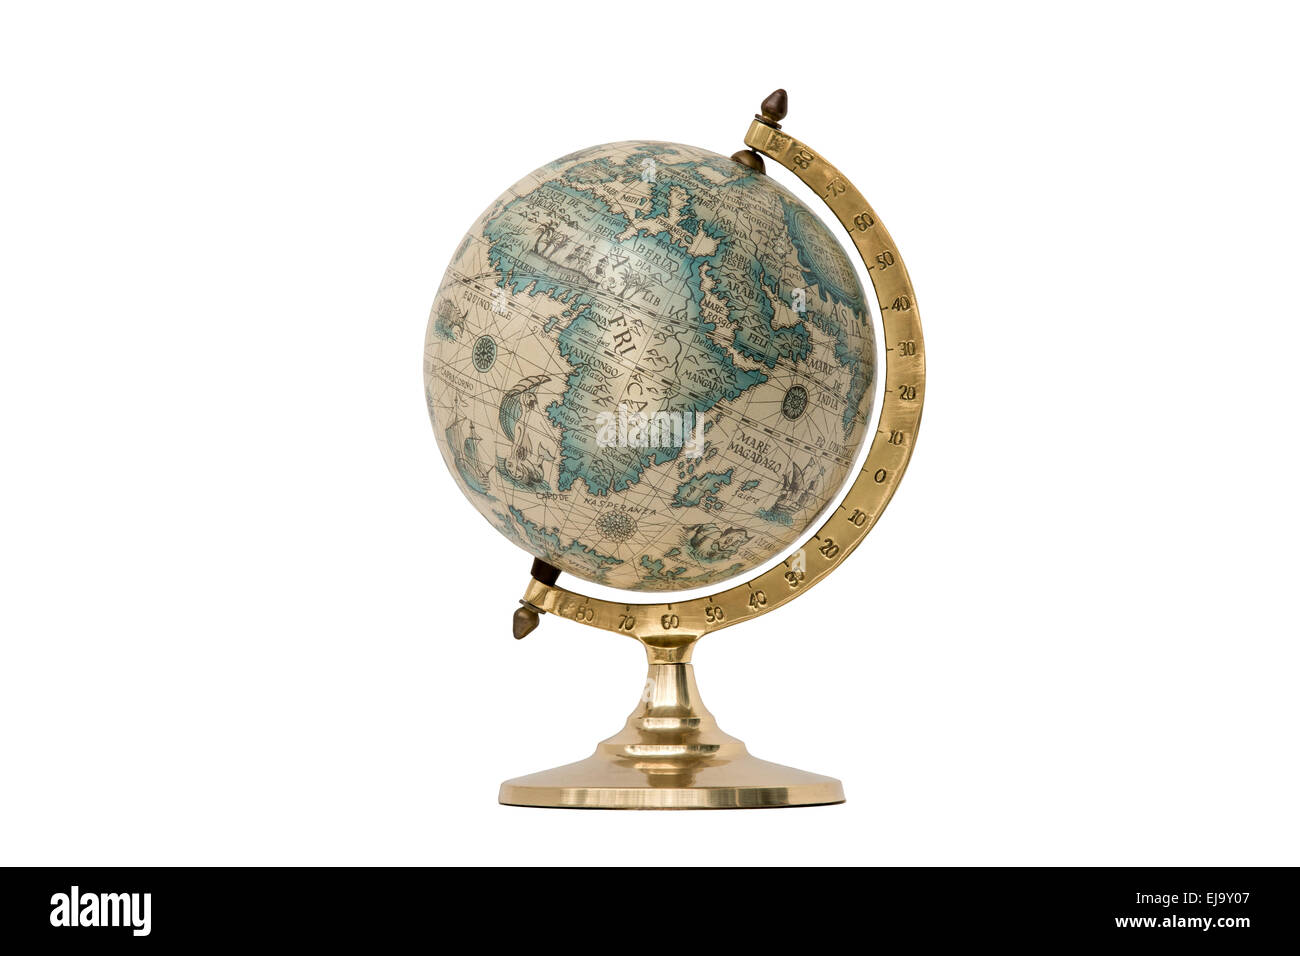 Antique world globe isolated on white background.  Studio close-up.  Showing Africa and some of Middle East. Stock Photo